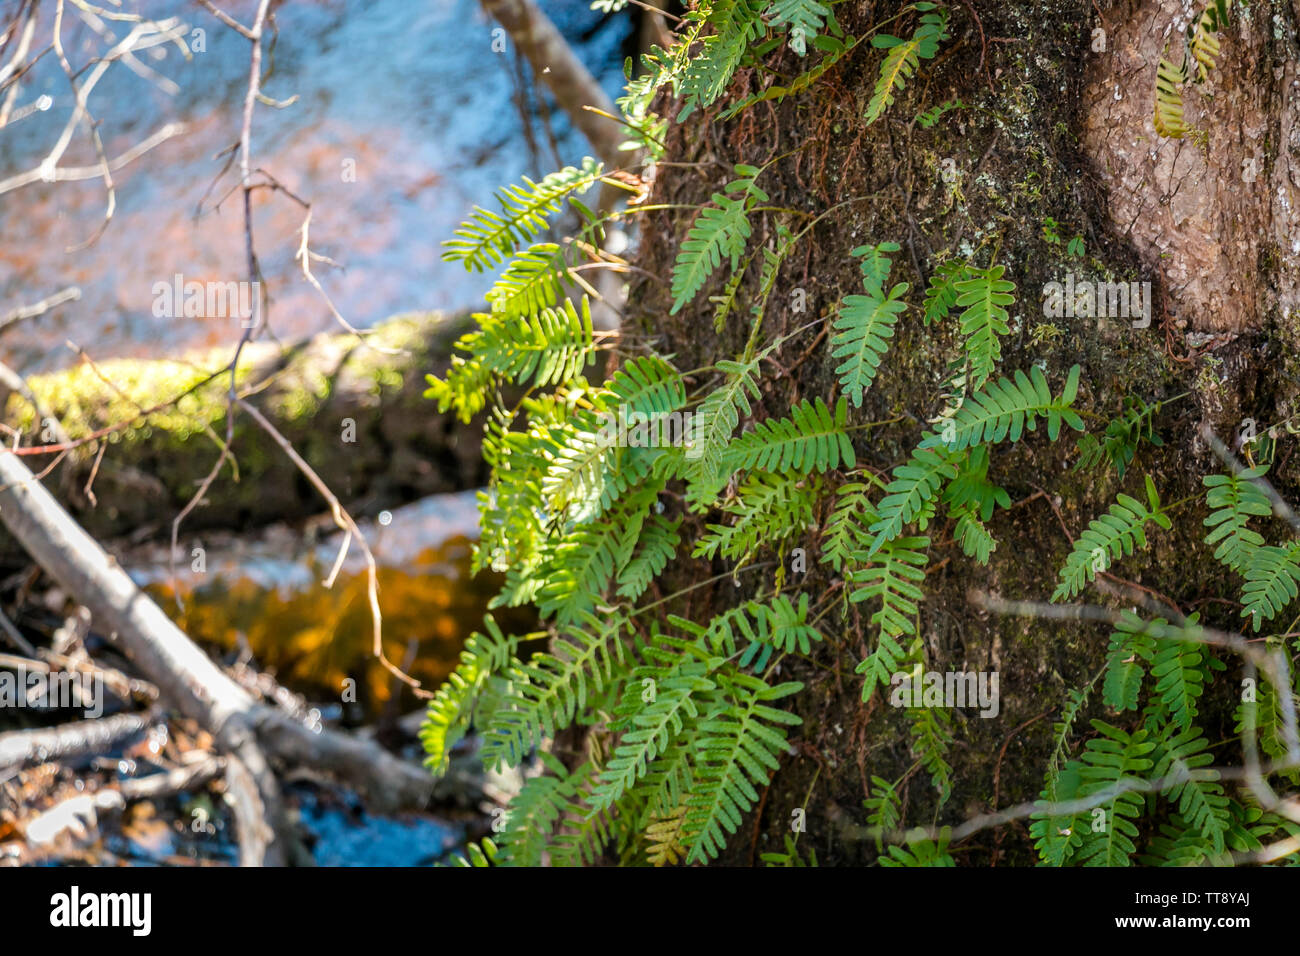 Moss and ferns growing on a tree. Stock Photo